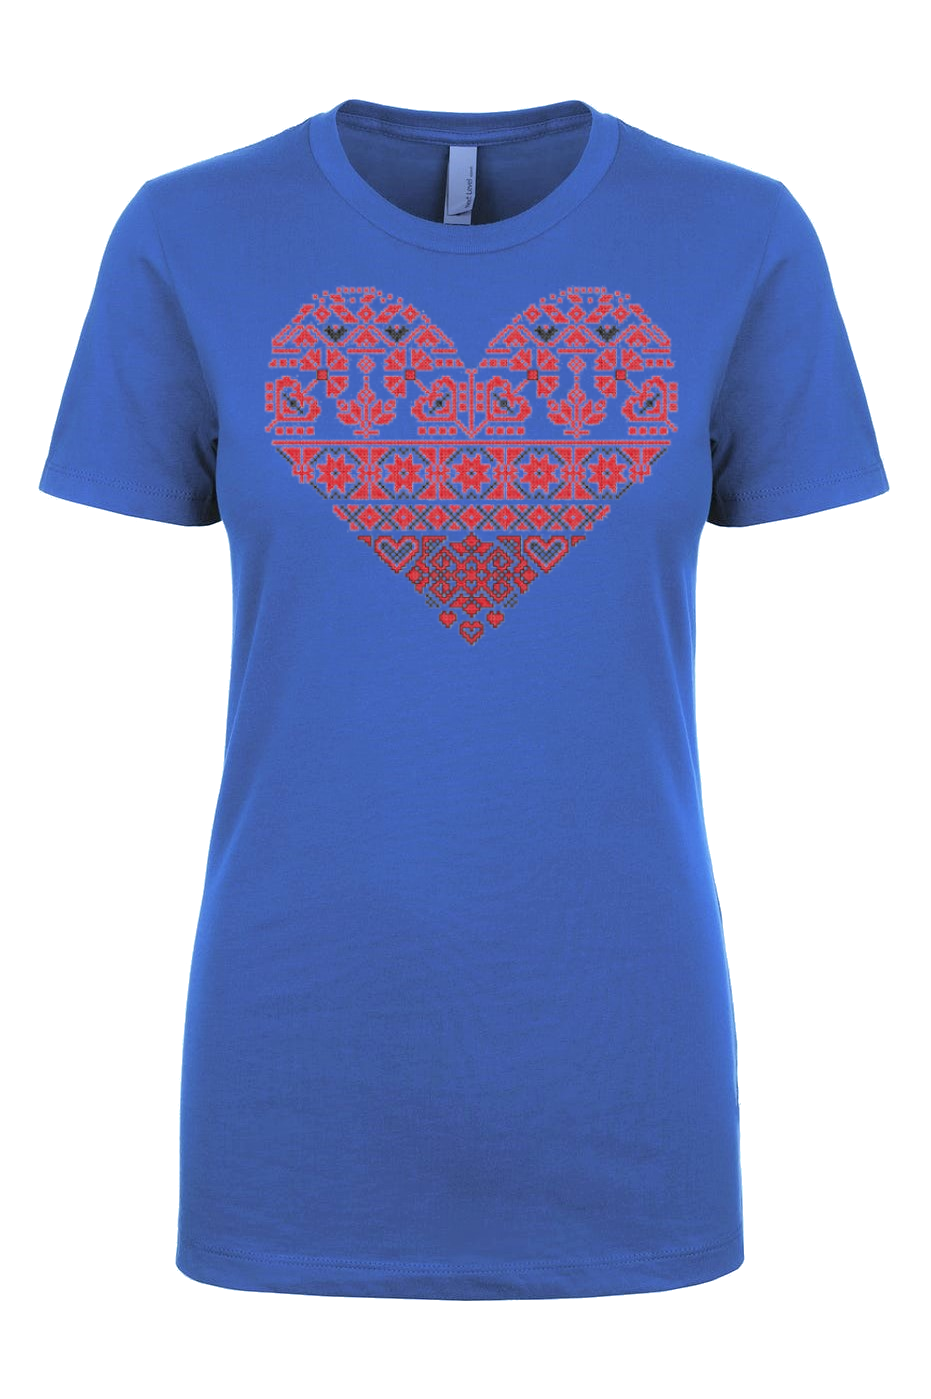 Female fit t-shirt "Red and black heart"